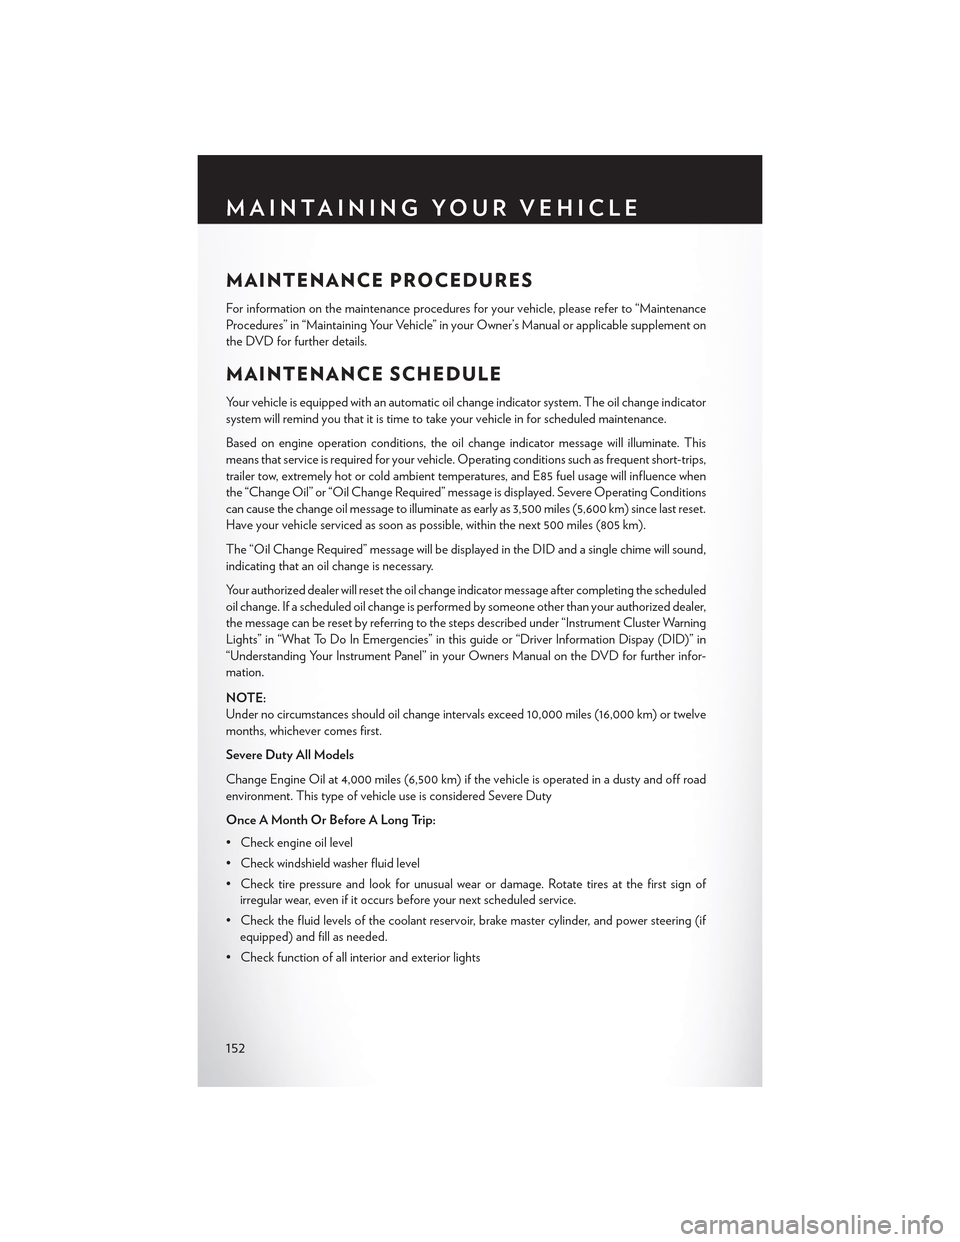 CHRYSLER 300 2015 2.G User Guide MAINTENANCE PROCEDURES
For information on the maintenance procedures for your vehicle, please refer to “Maintenance
Procedures” in “Maintaining Your Vehicle” in your Owner’s Manual or applic